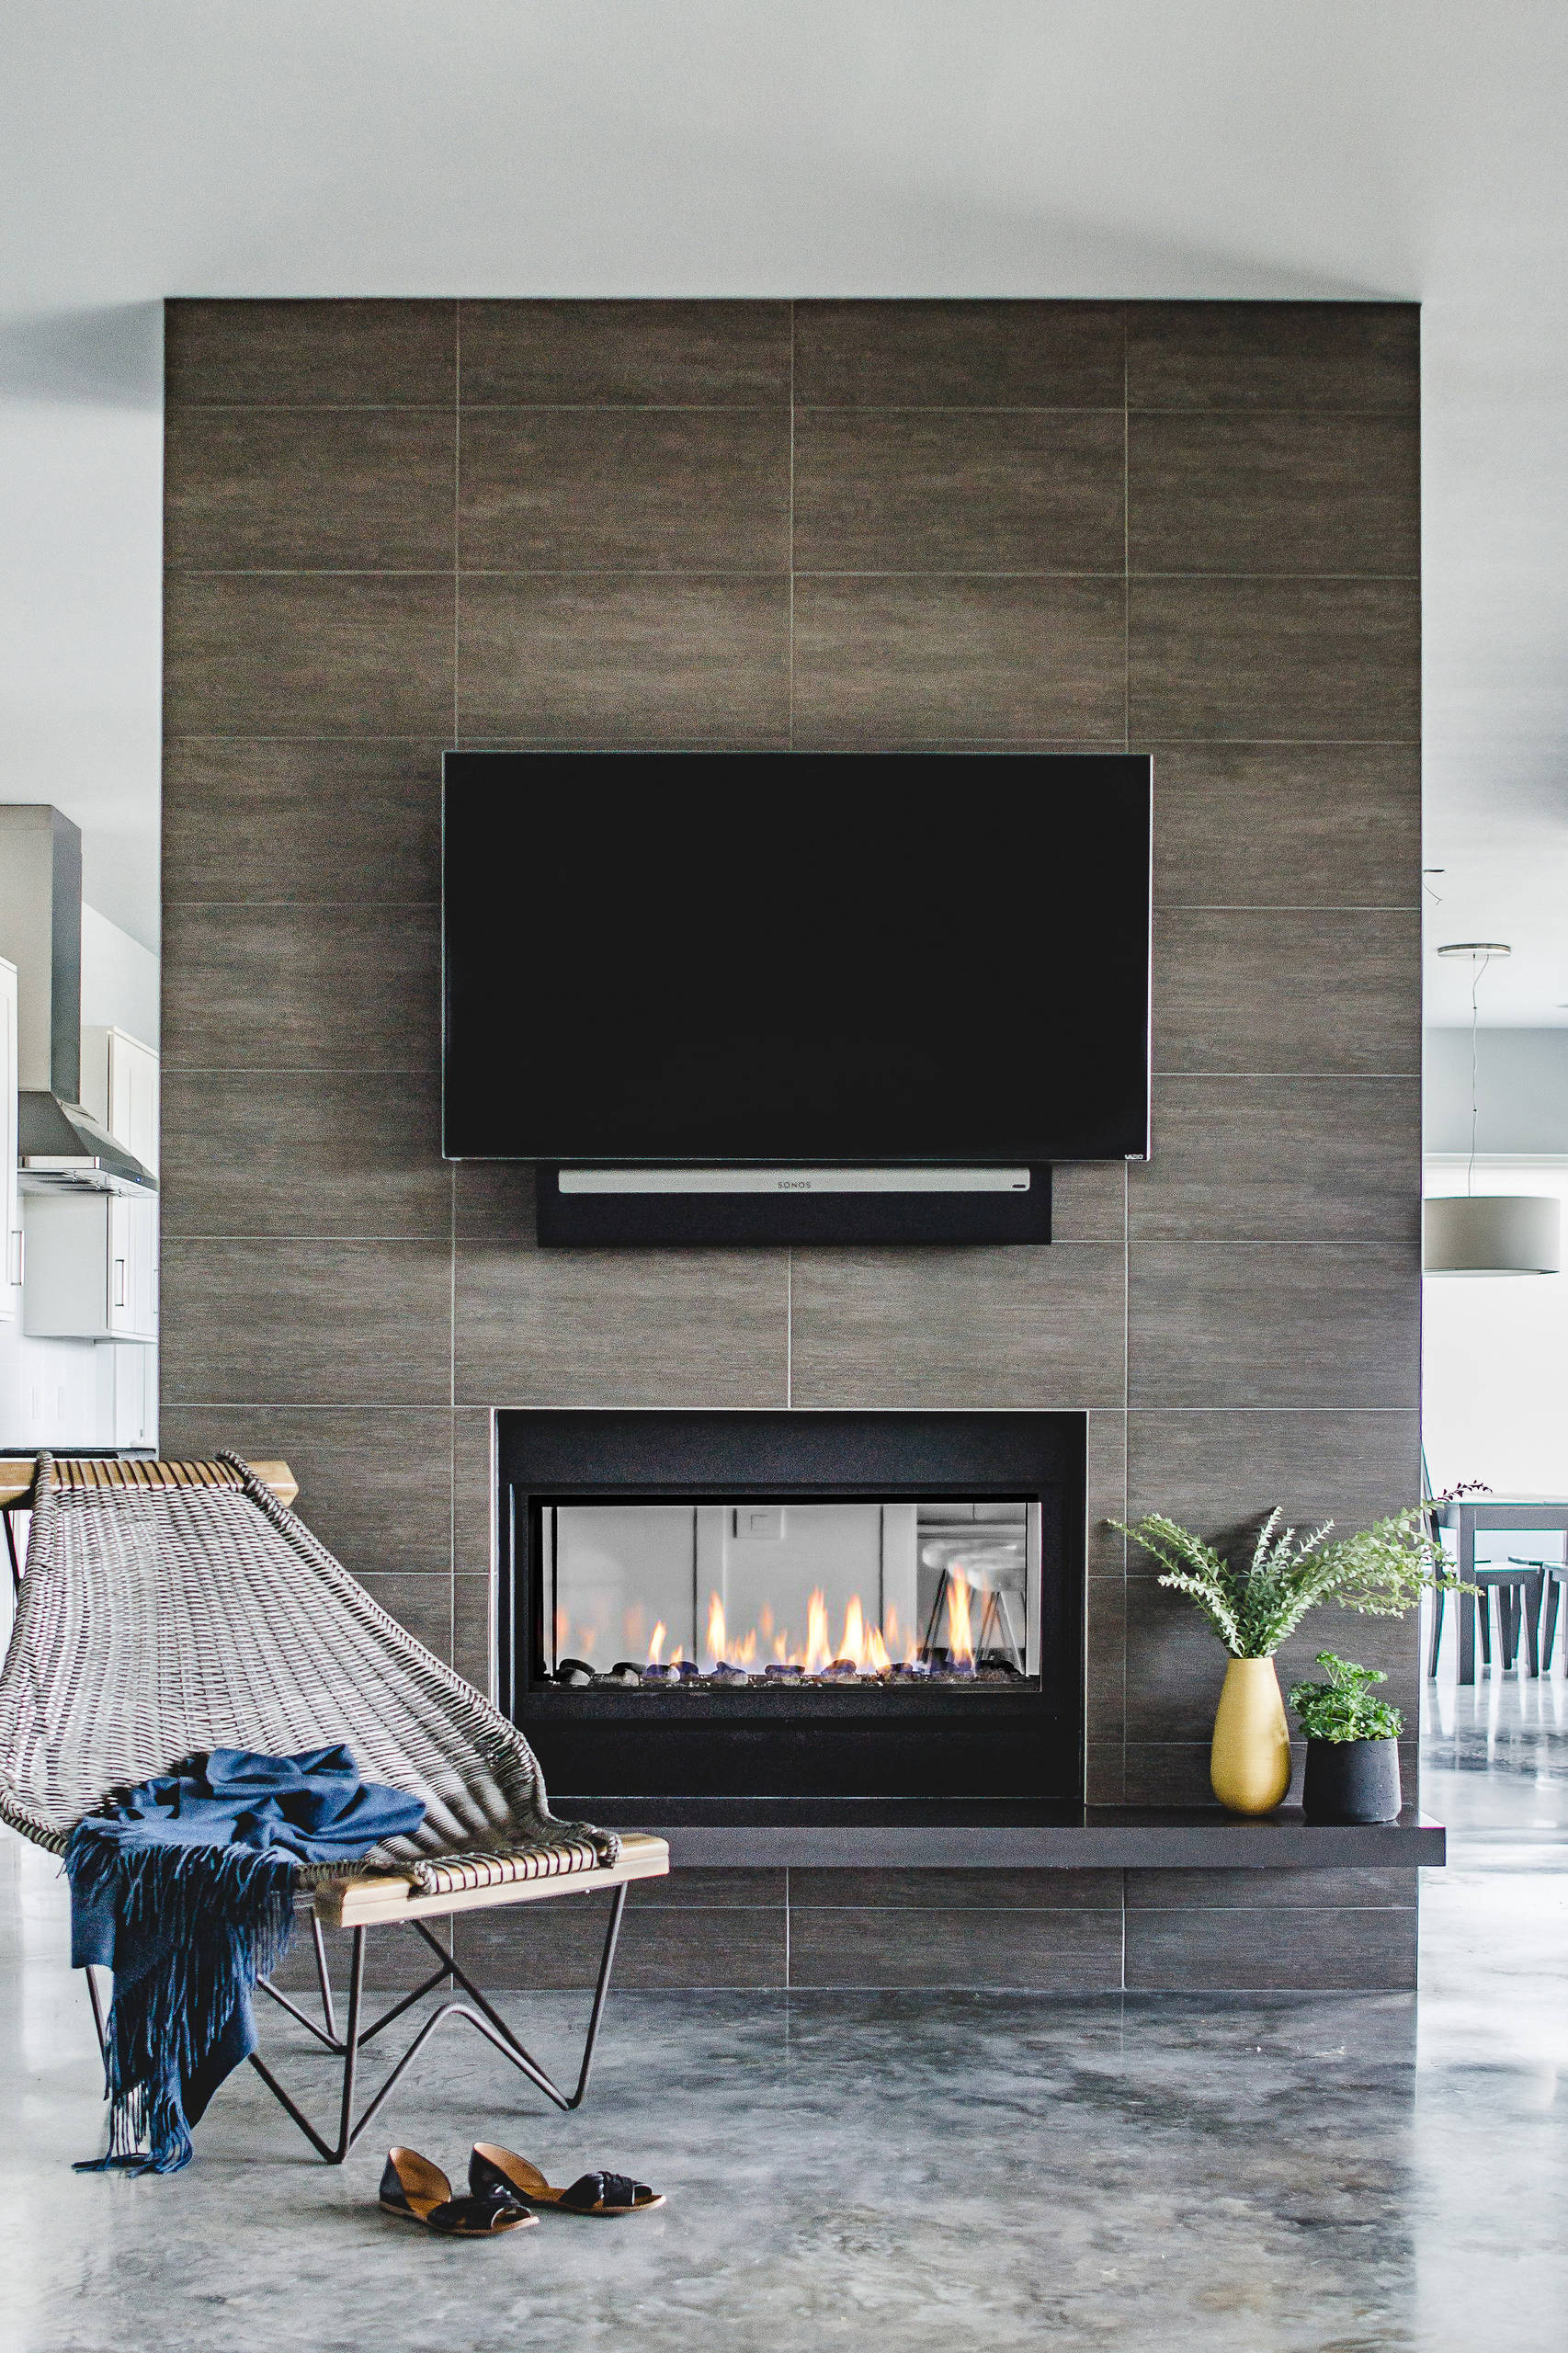 75 Living Room With A Two Sided Fireplace Ideas You Ll Love September 22 Houzz